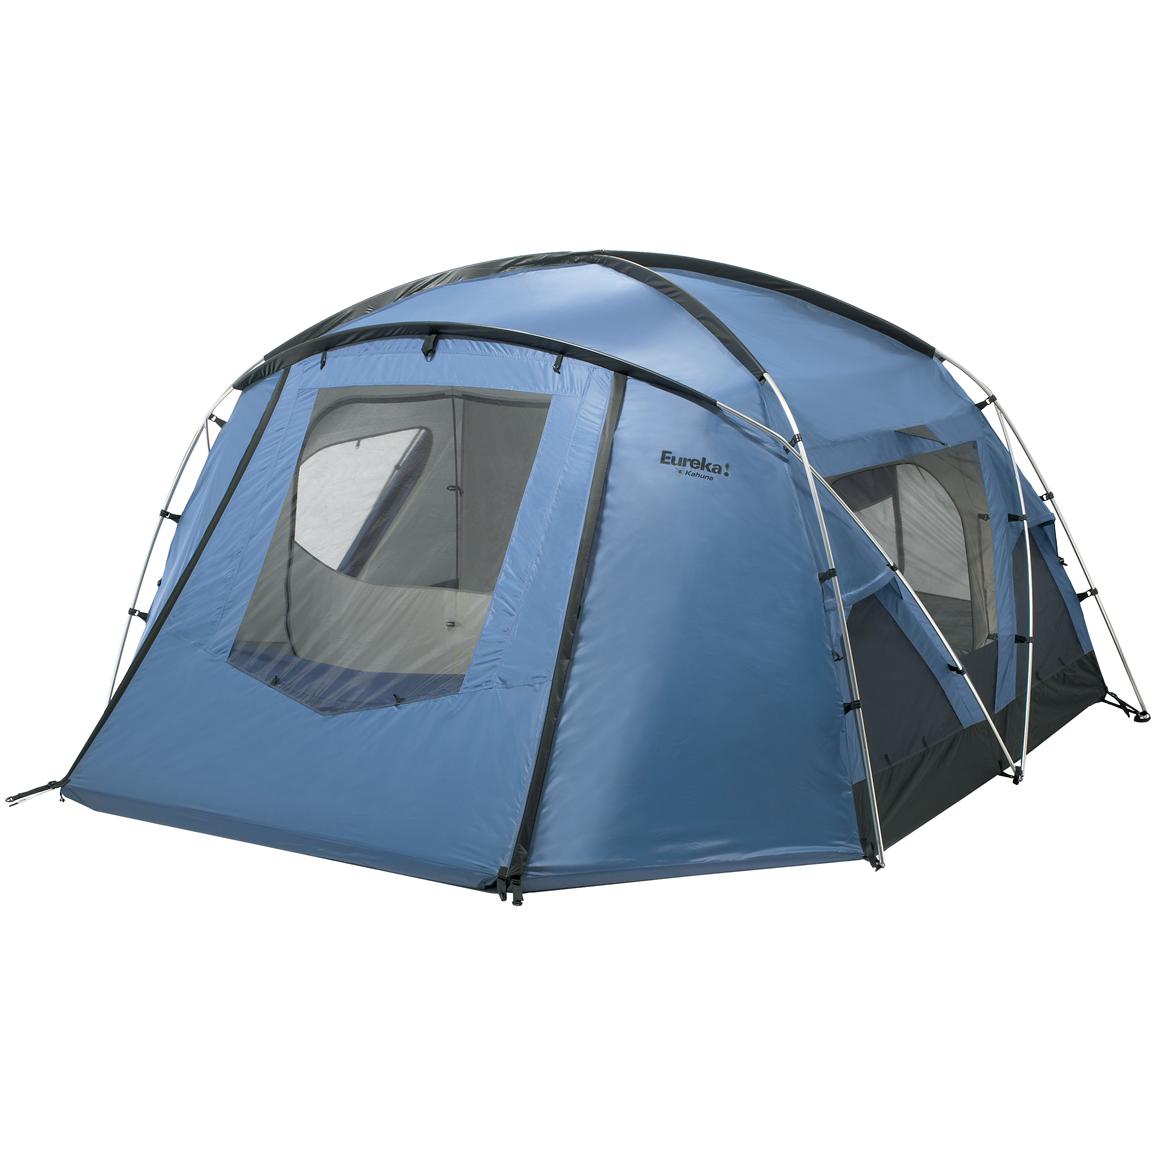 Eureka!® Kahuna Tent - 93668, Backpacking Tents at Sportsman's Guide